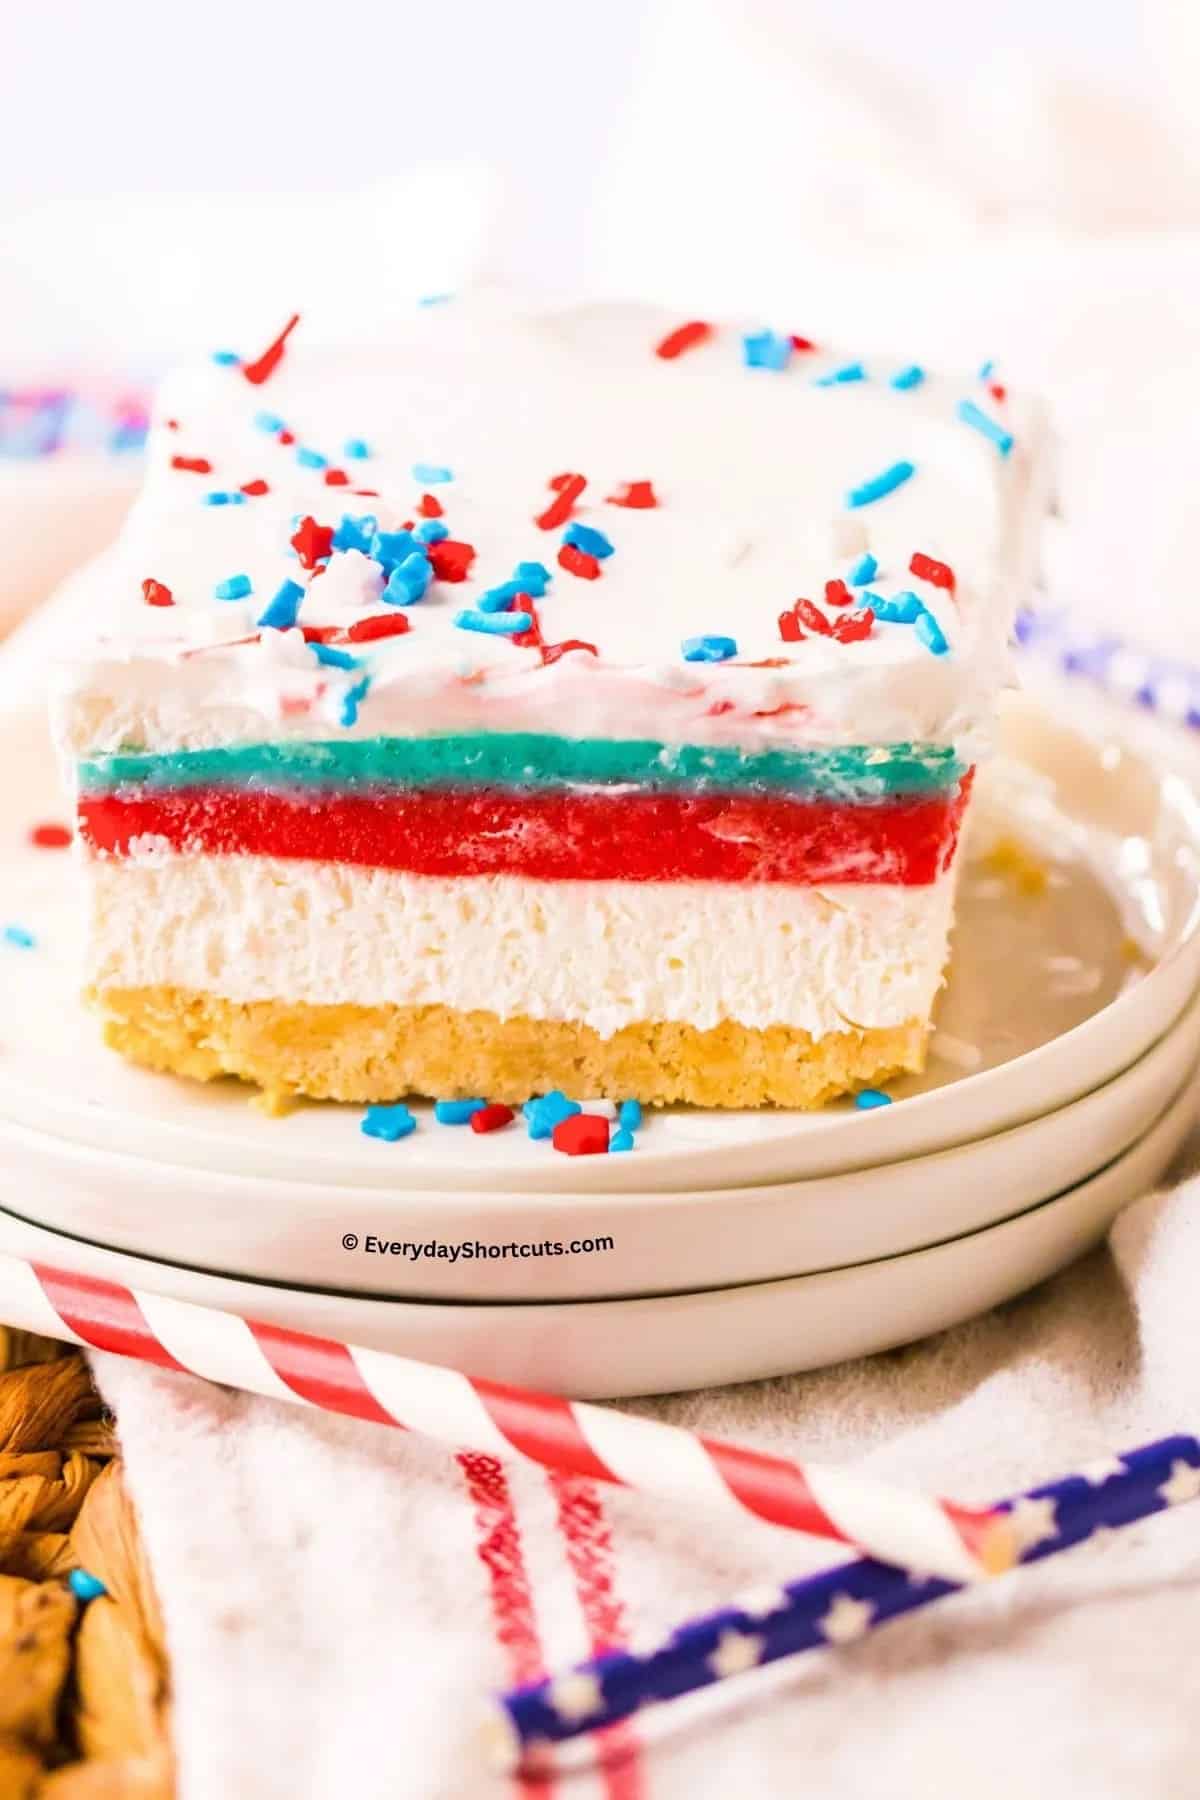 RED WHITE AND BLUE DESSERT